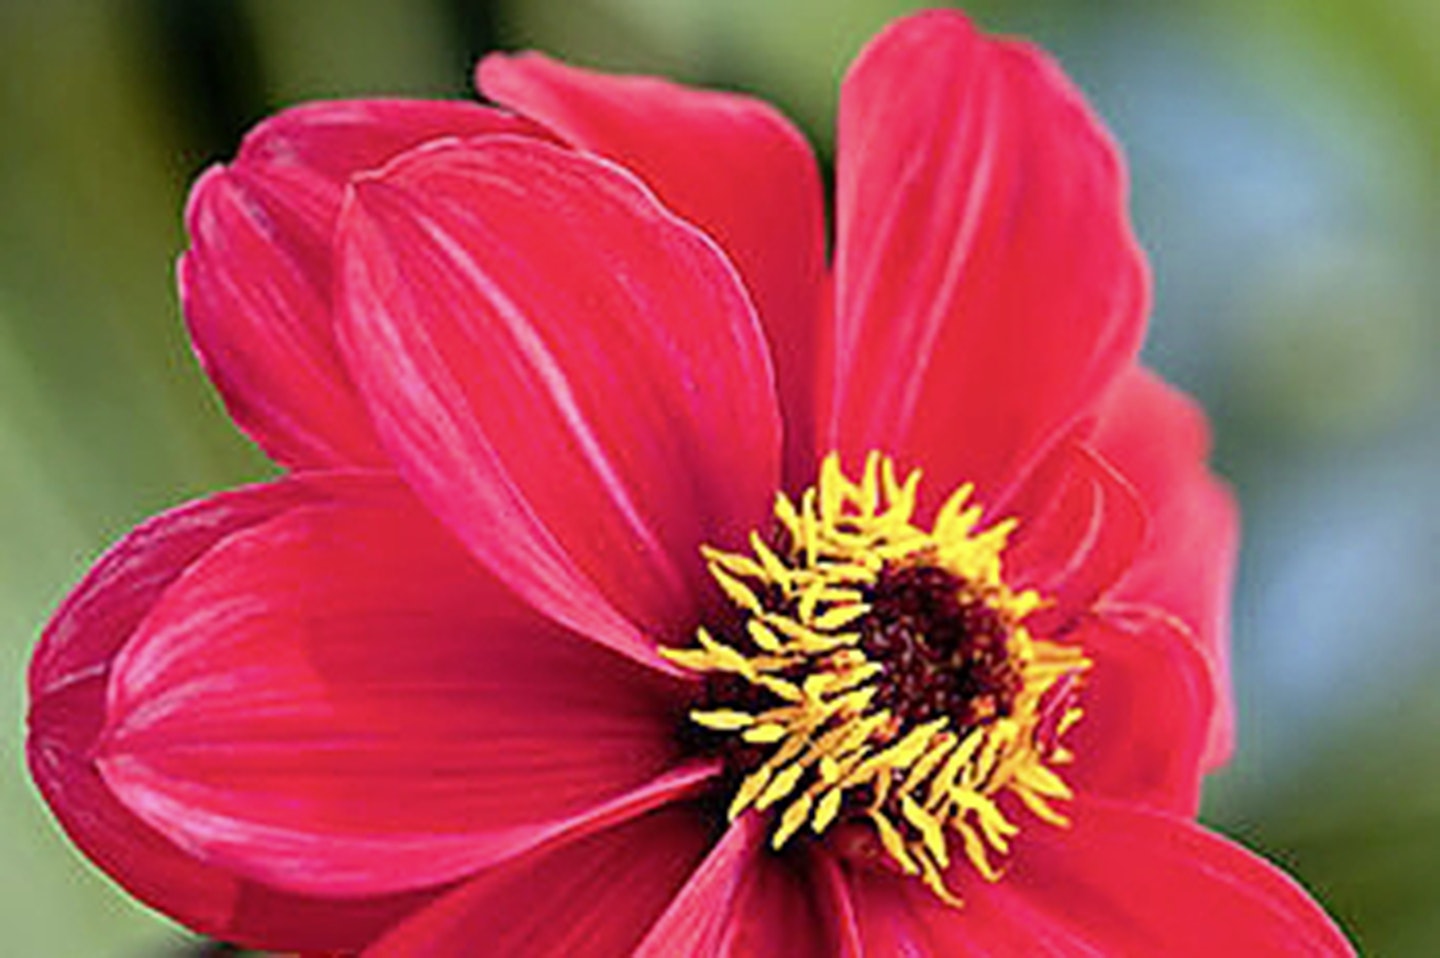 Dahlia - Bishop of Llandaff, one of the most sought-after varieties